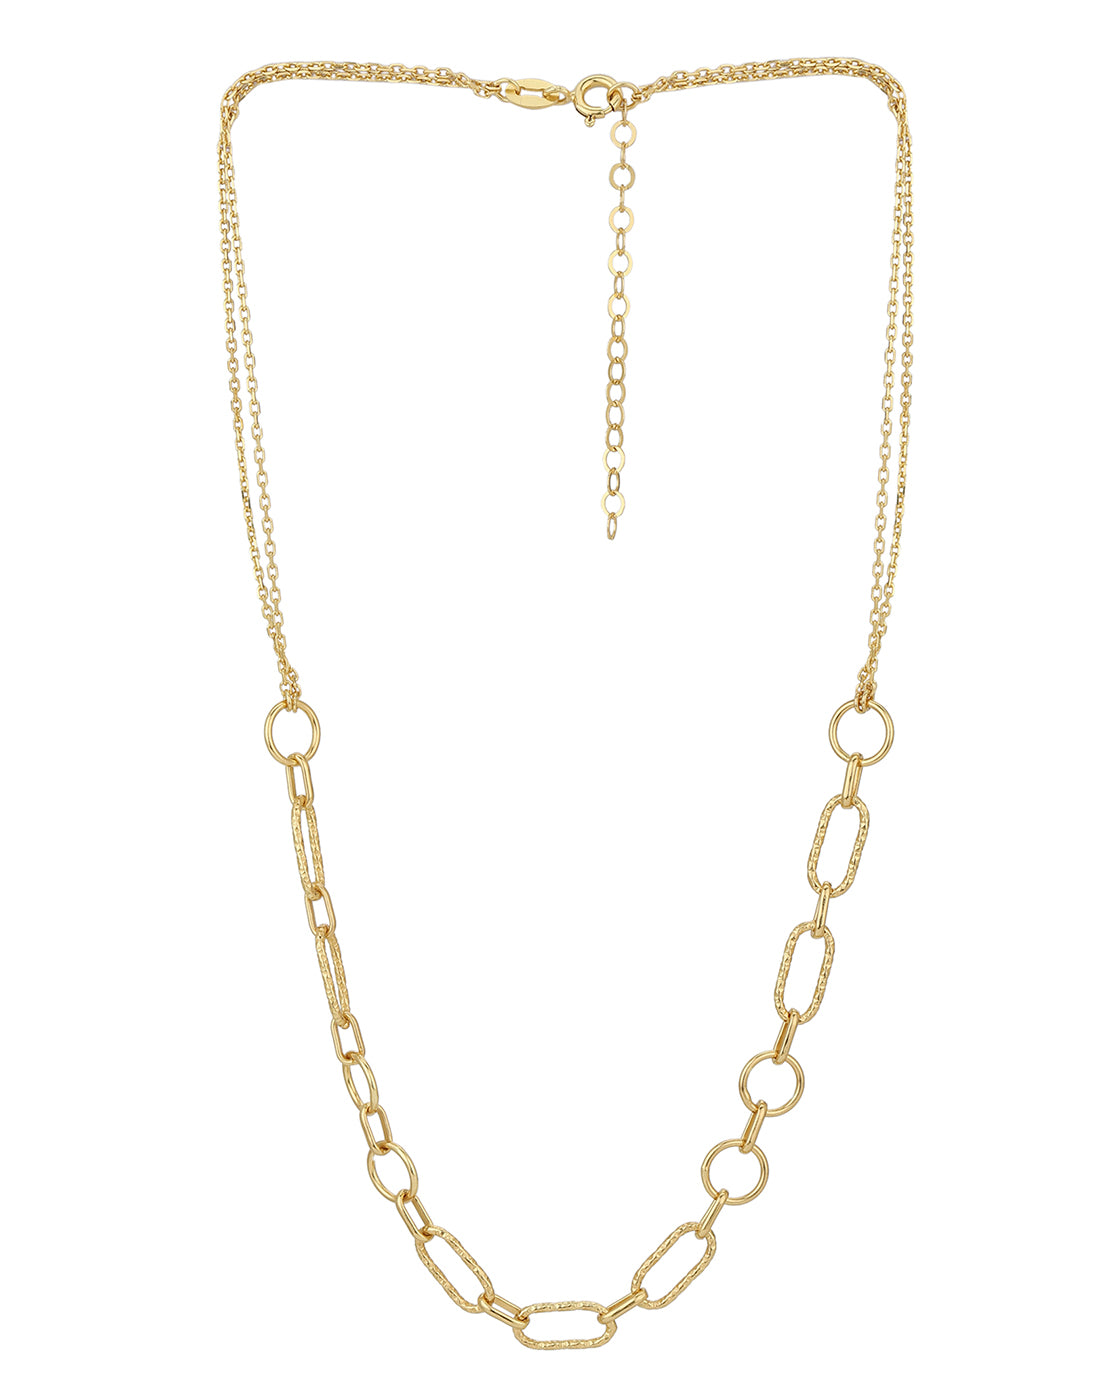 Double Link Choker Chain Necklace, 14 Karat Yellow Gold, Sailor's Knot –  Five Star Jewelry Brokers